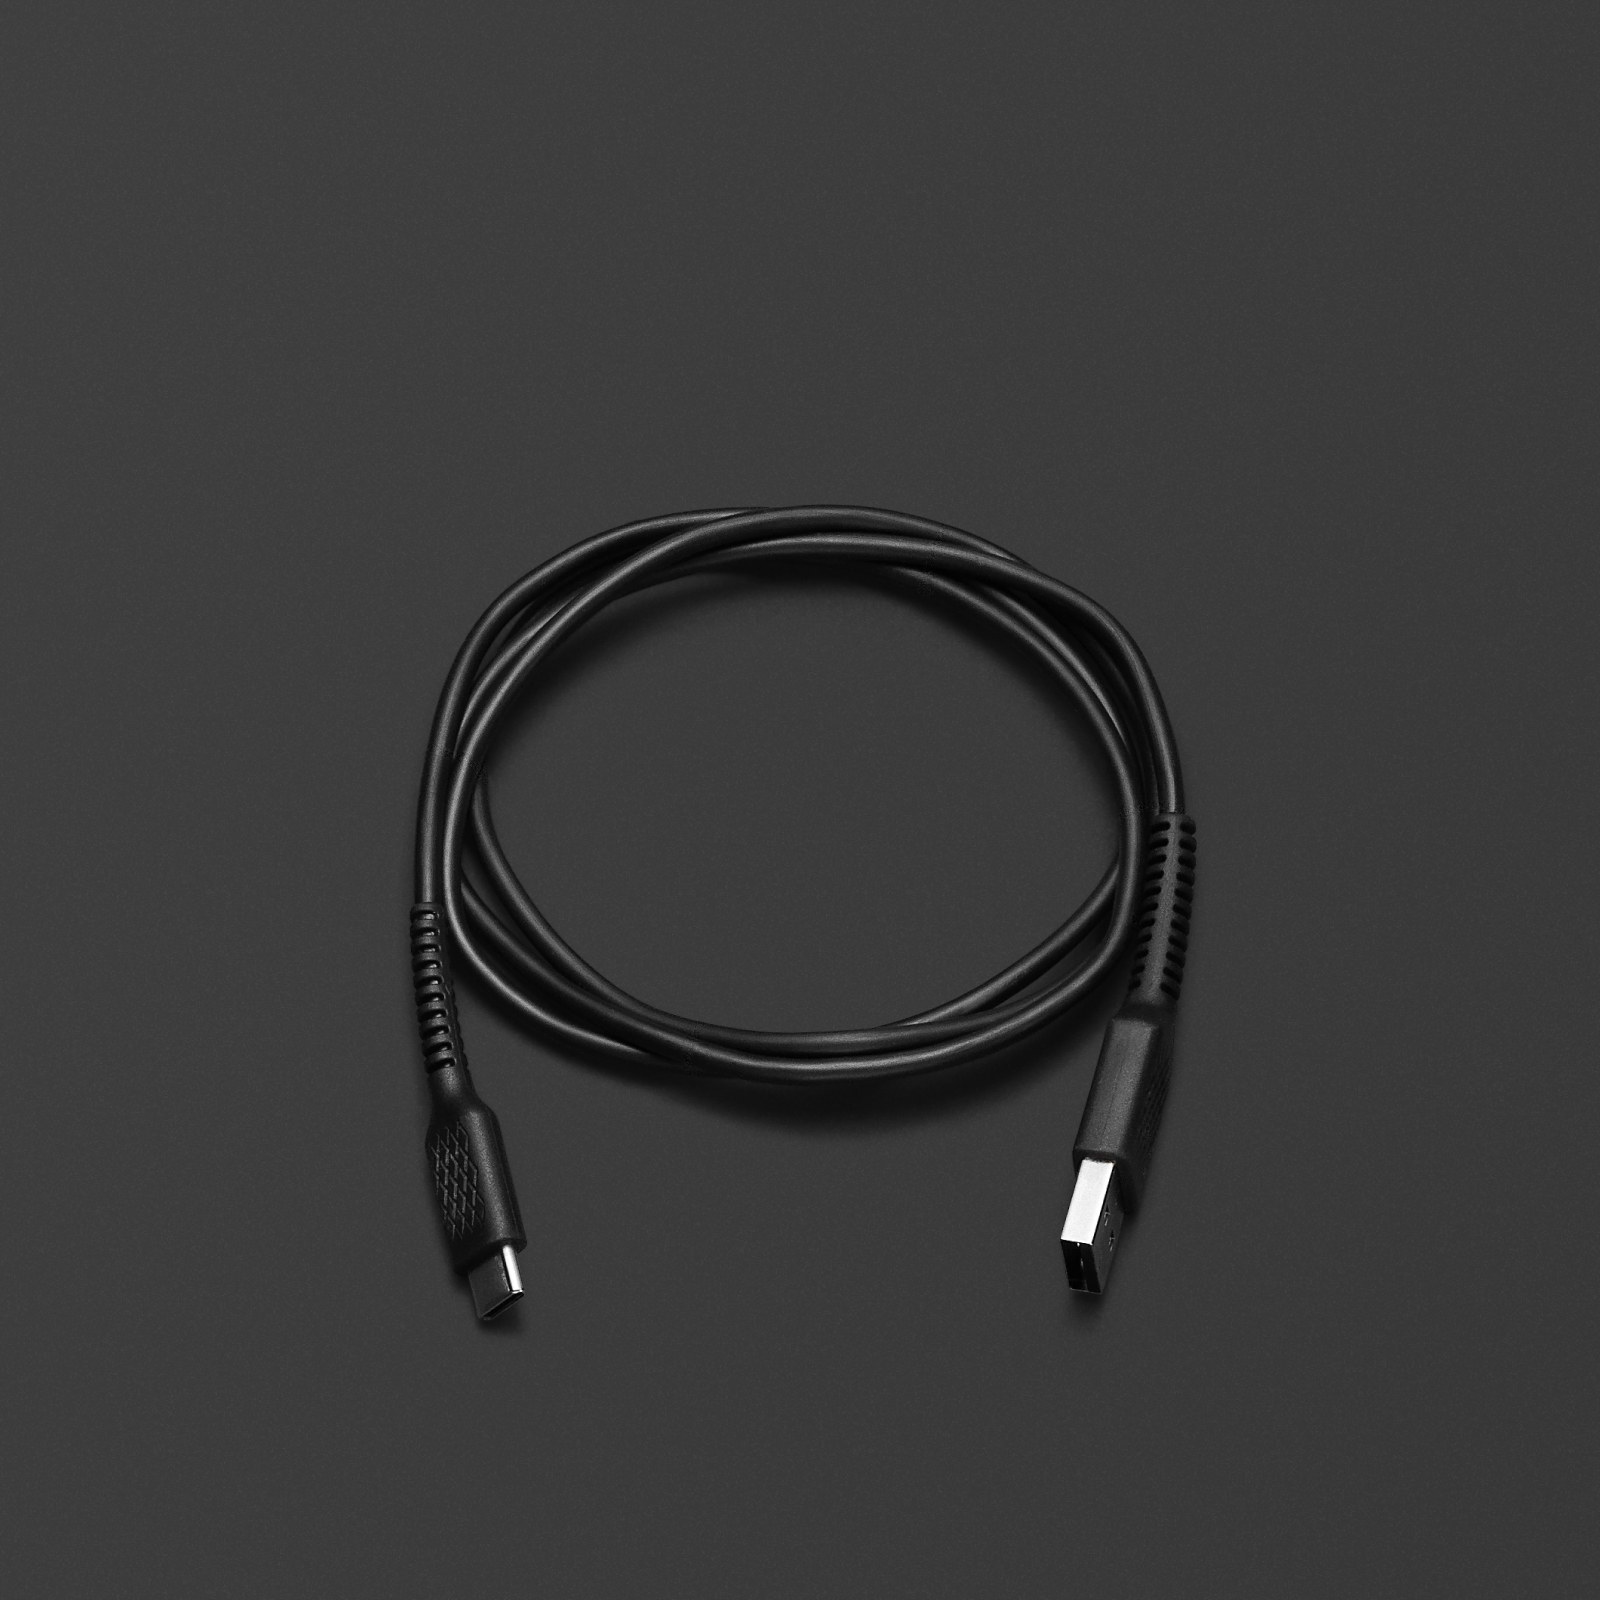 A black Marshall USB-C LONG CHARGING CABLE on a black surface.